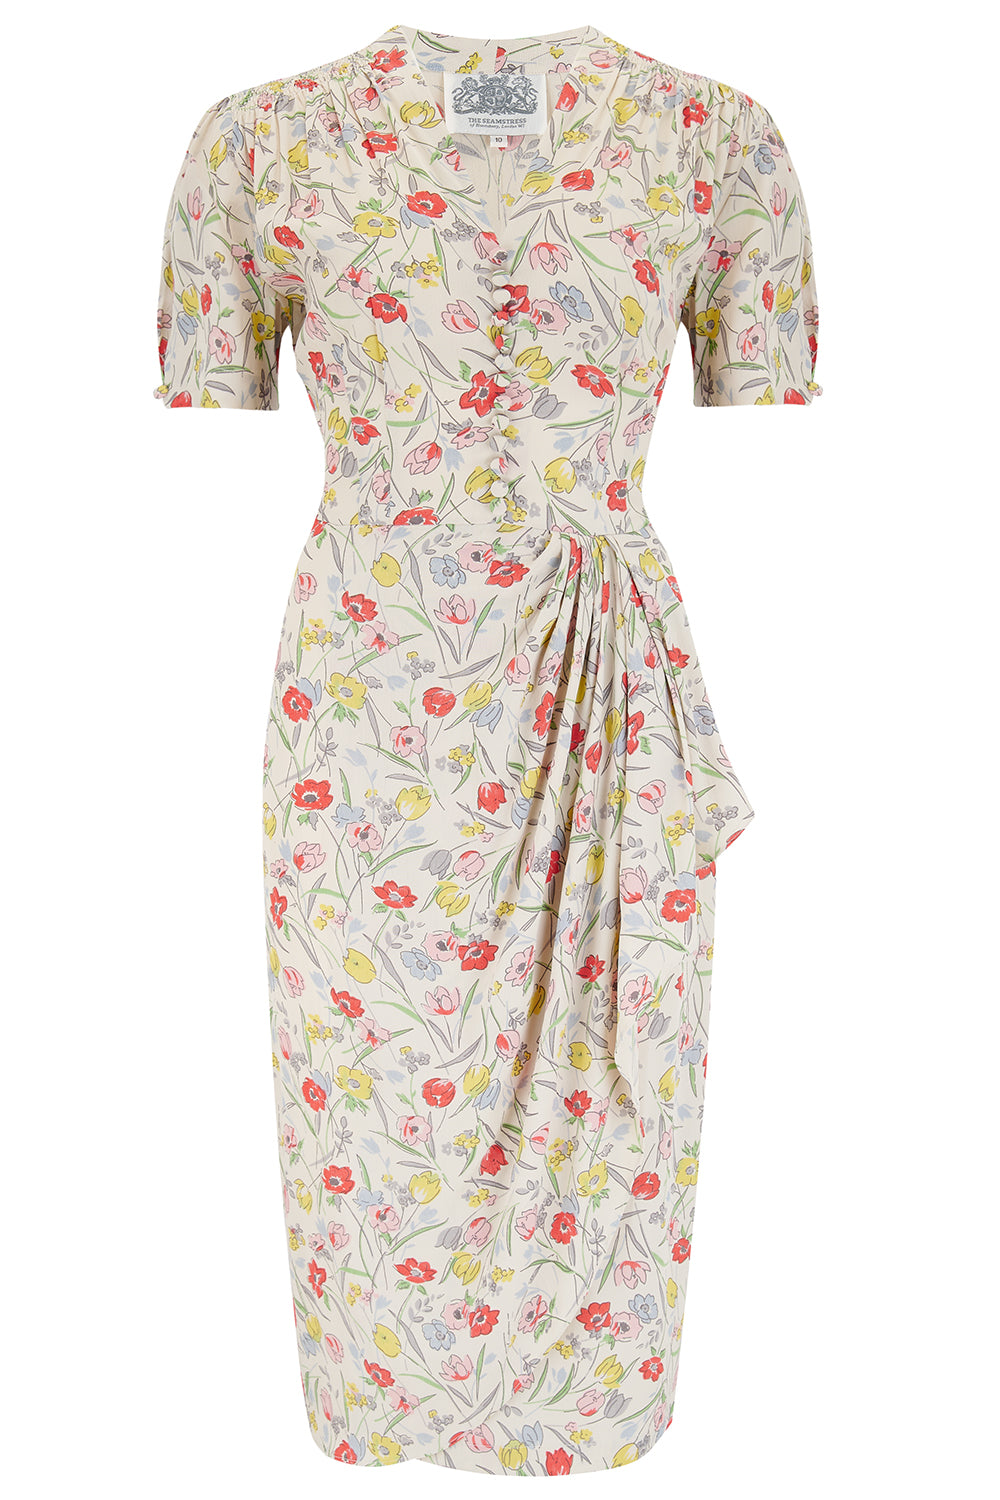 "Mabel" Dress in Poppy Print, A Classic 1940s Inspired Vintage Style - True and authentic vintage style clothing, inspired by the Classic styles of CC41 , WW2 and the fun 1950s RocknRoll era, for everyday wear plus events like Goodwood Revival, Twinwood Festival and Viva Las Vegas Rockabilly Weekend Rock n Romance The Seamstress of Bloomsbury